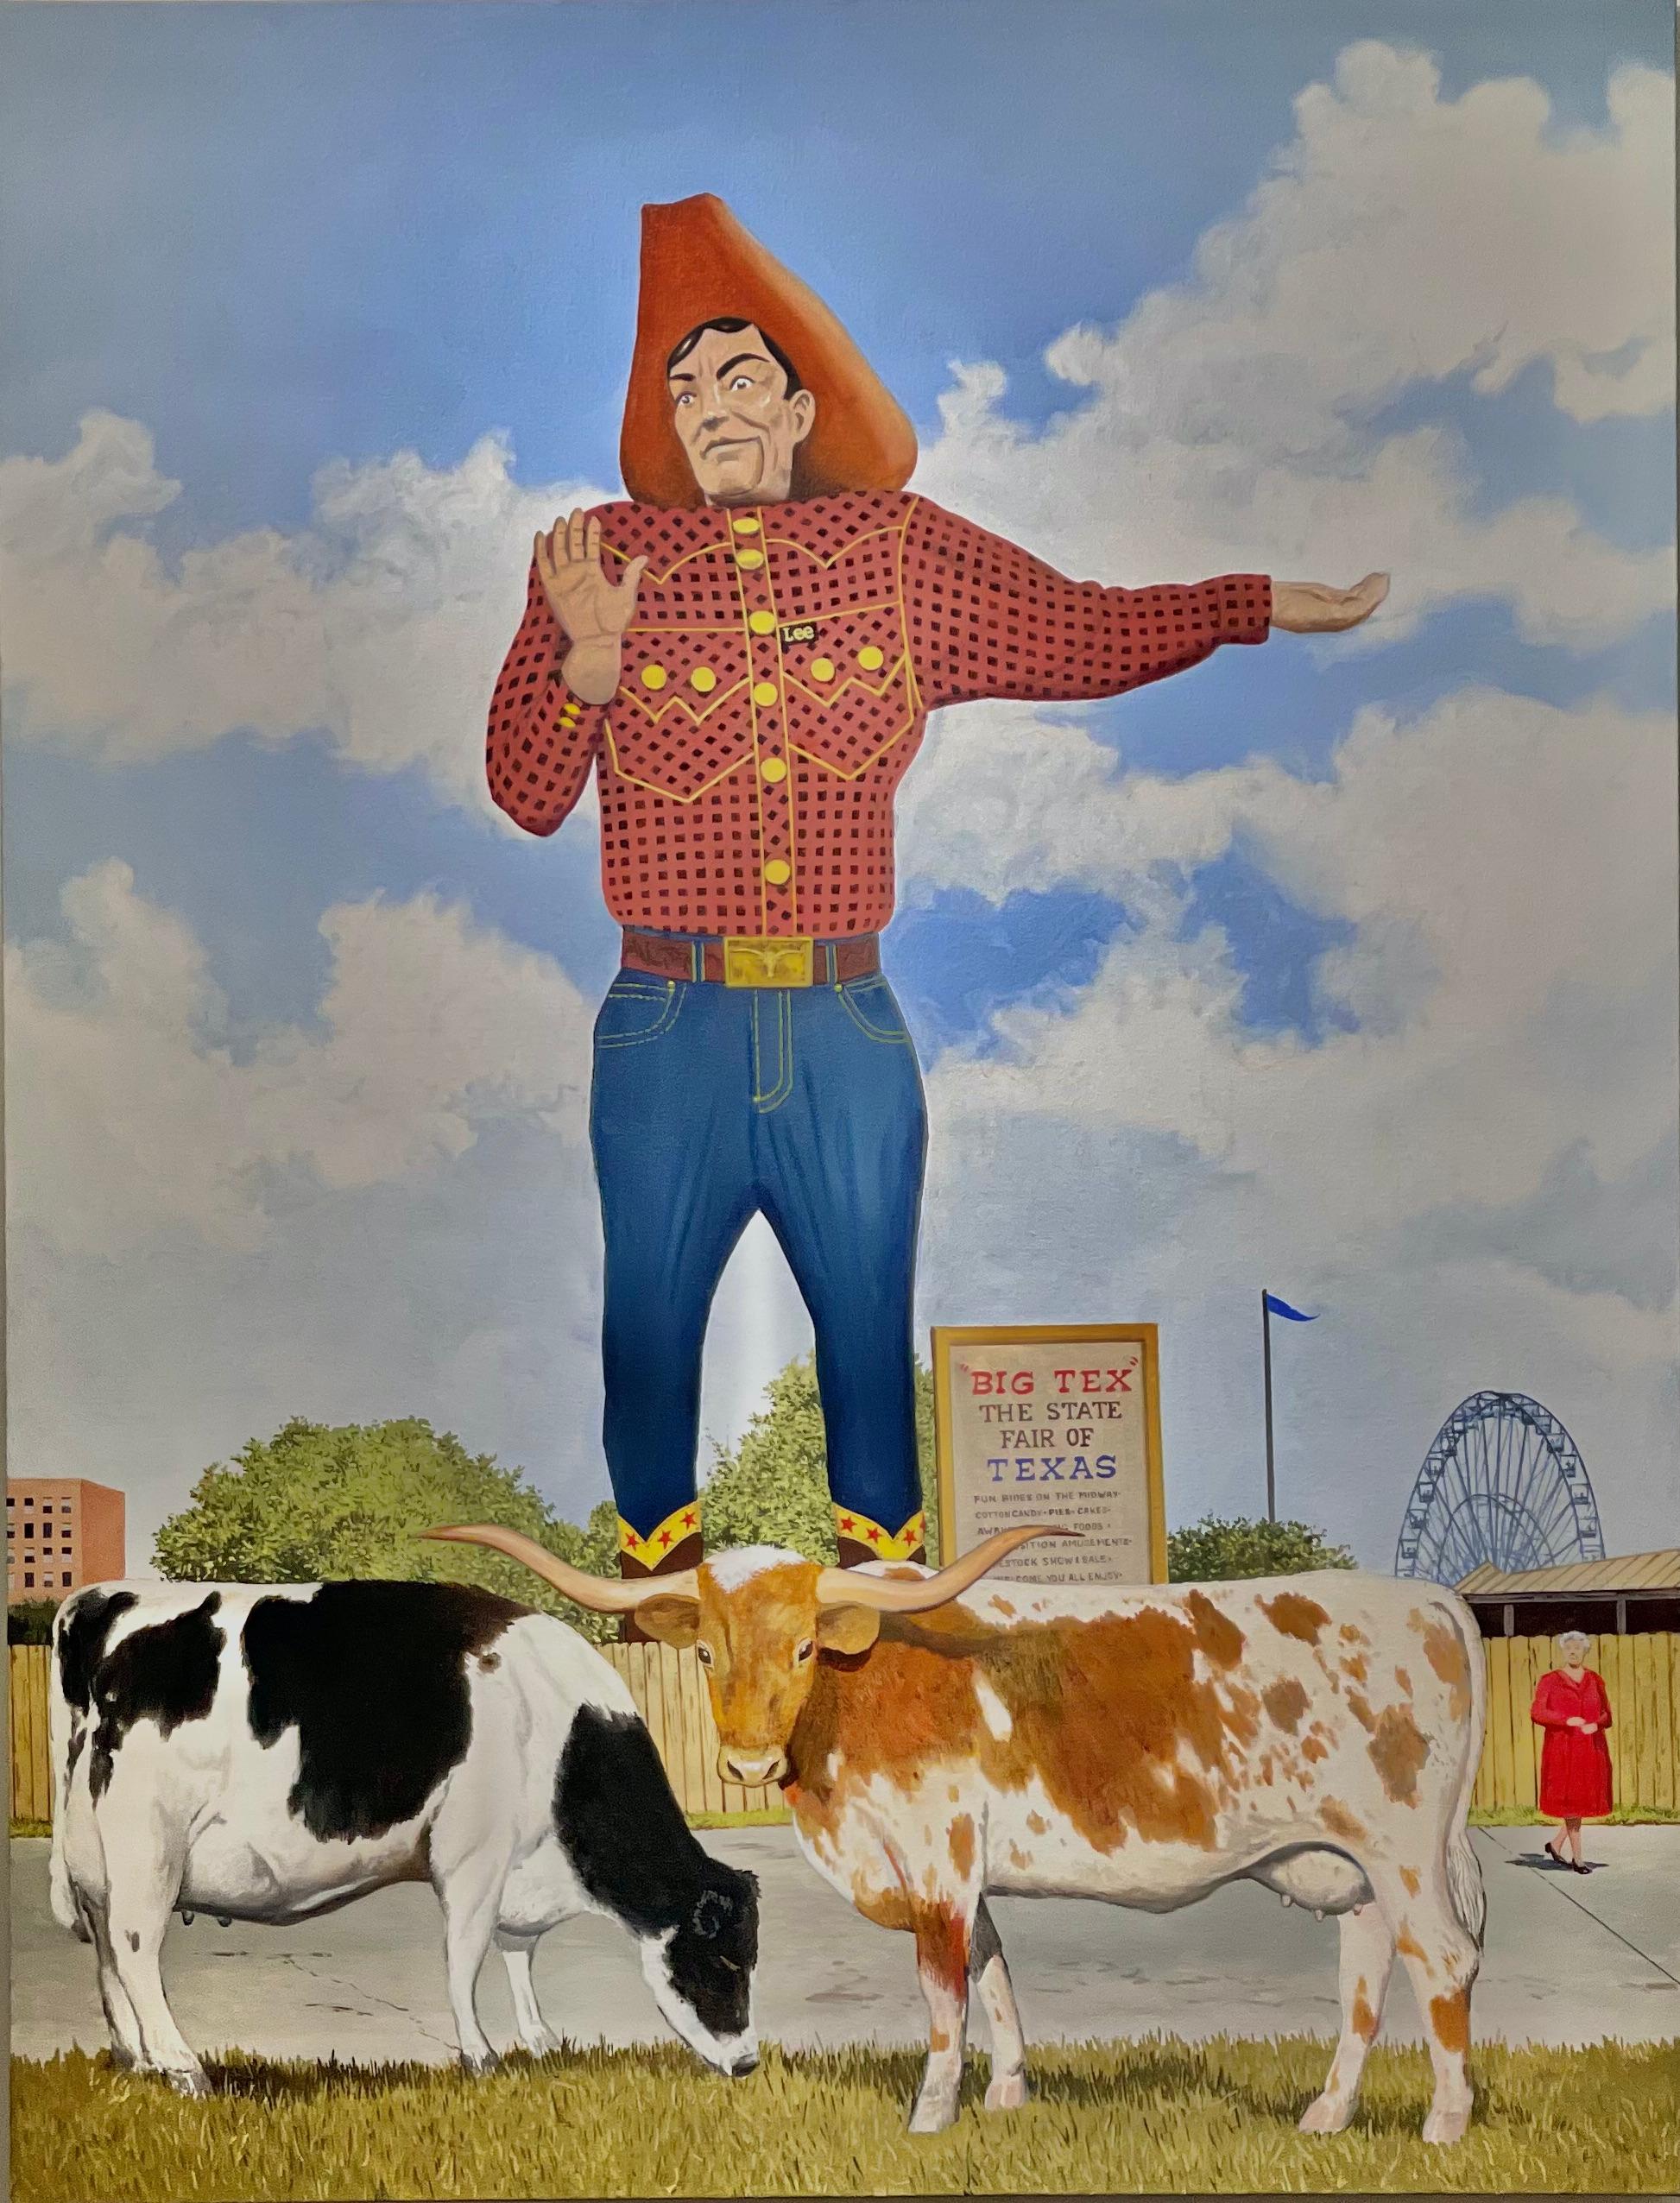 Daniel Blagg Still-Life Painting - Contemporary American Oil Painting with Big Tex, Cowboy, and Texas State Fair